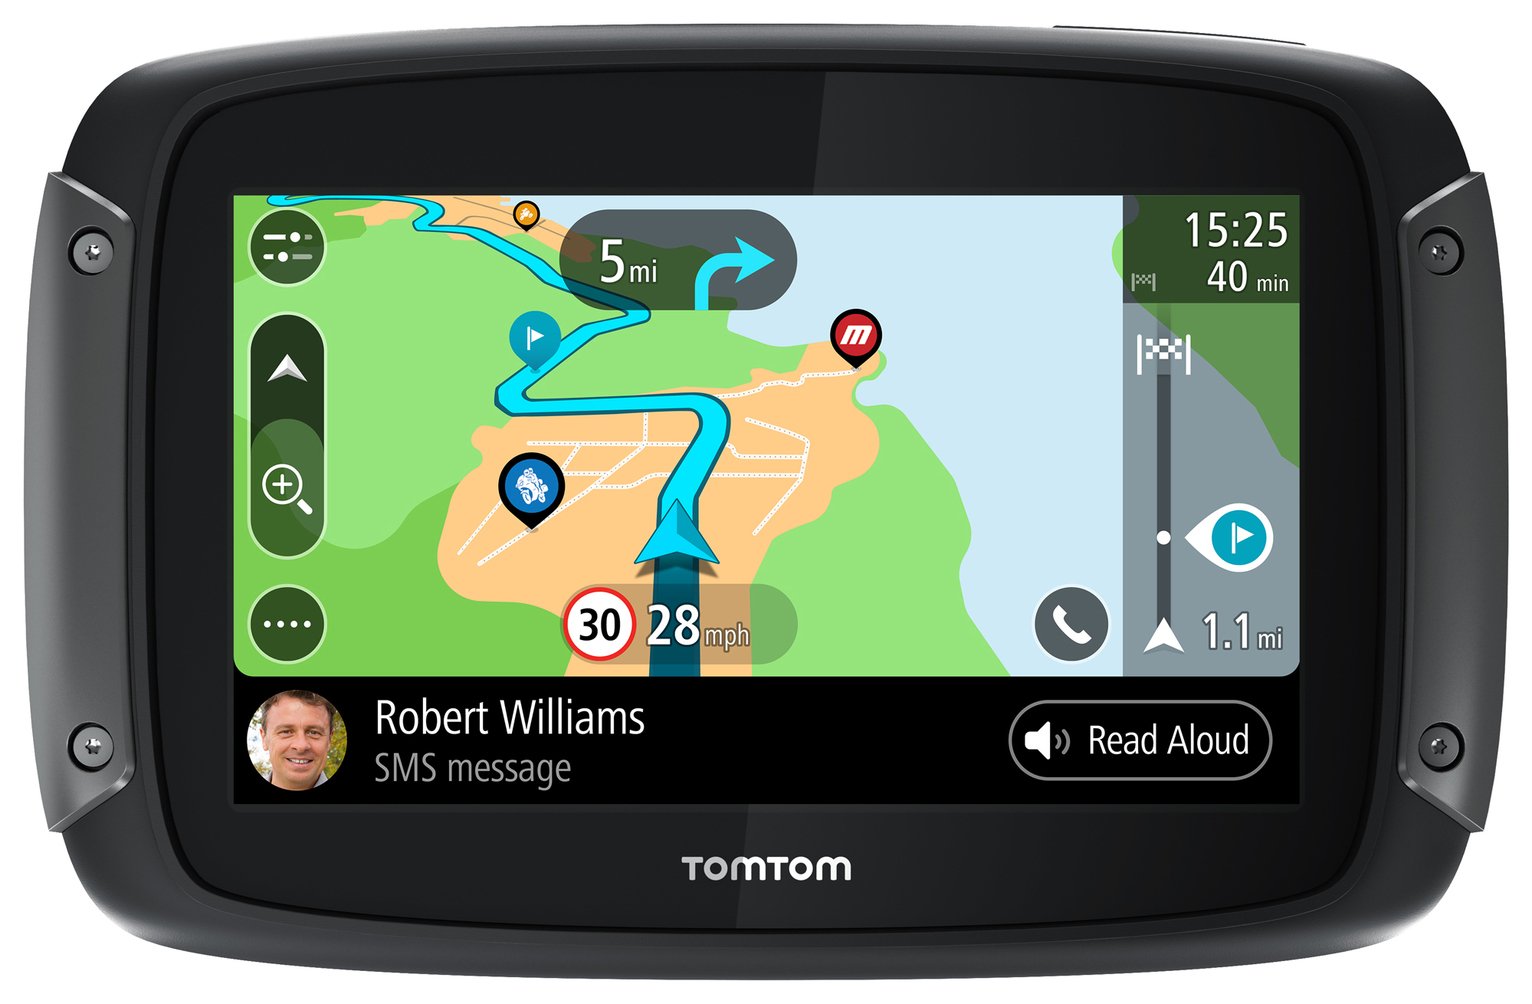 TomTom Rider 500 Motorcycle 4.3 In Sat Nav With Europe Maps Review